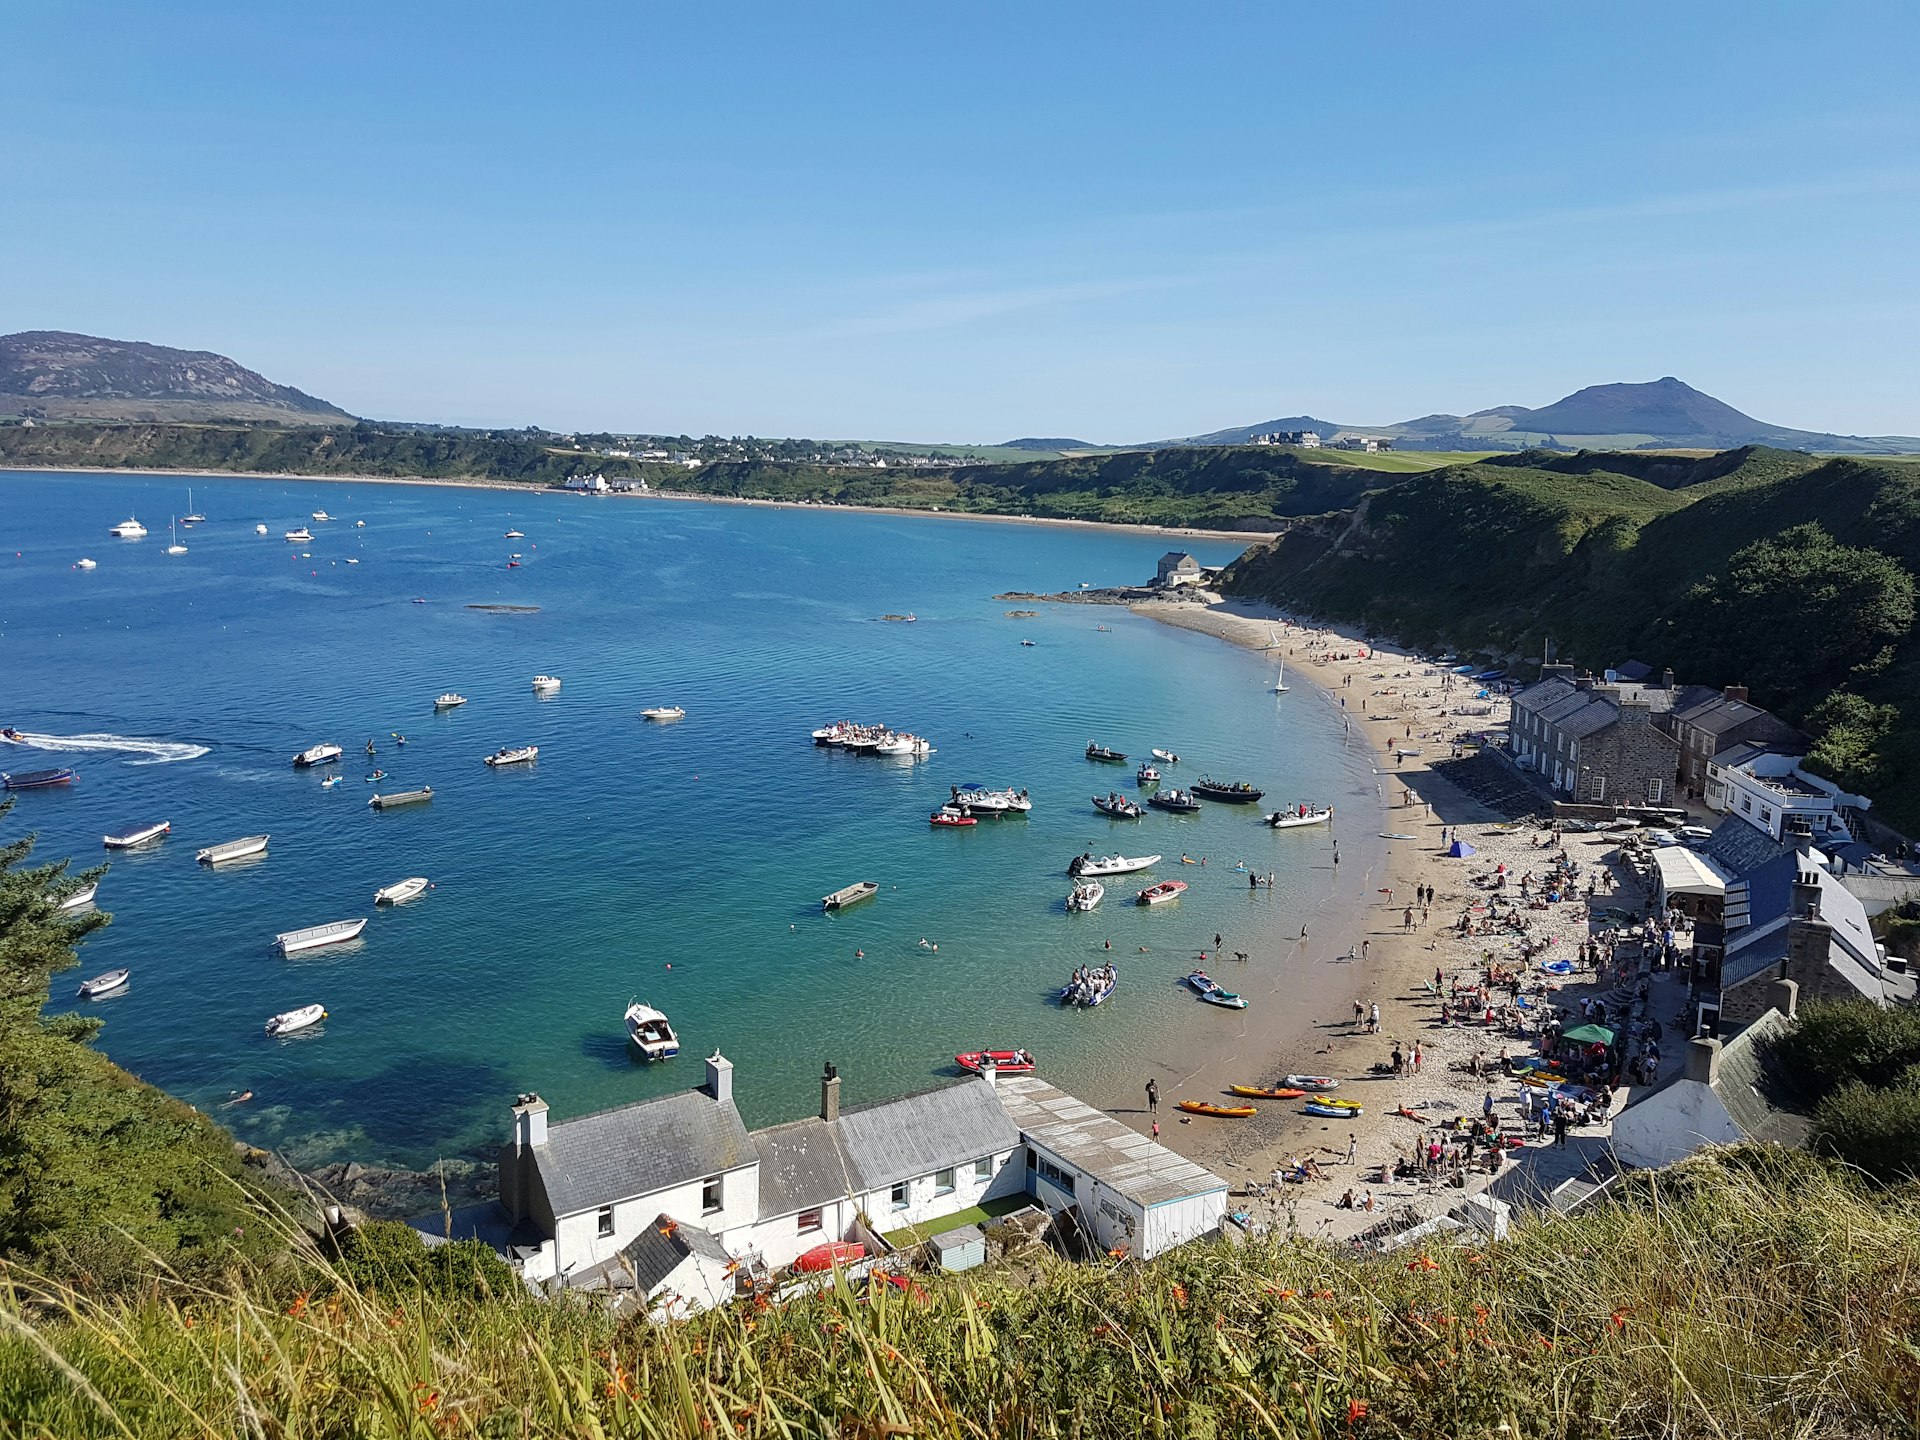 A view looking down to the boat-dotted bay at the busy Morfa Nefyn beach. Buildings line the beach-front, and many people are milling around on the sand outside Tŷ Coch Inn.